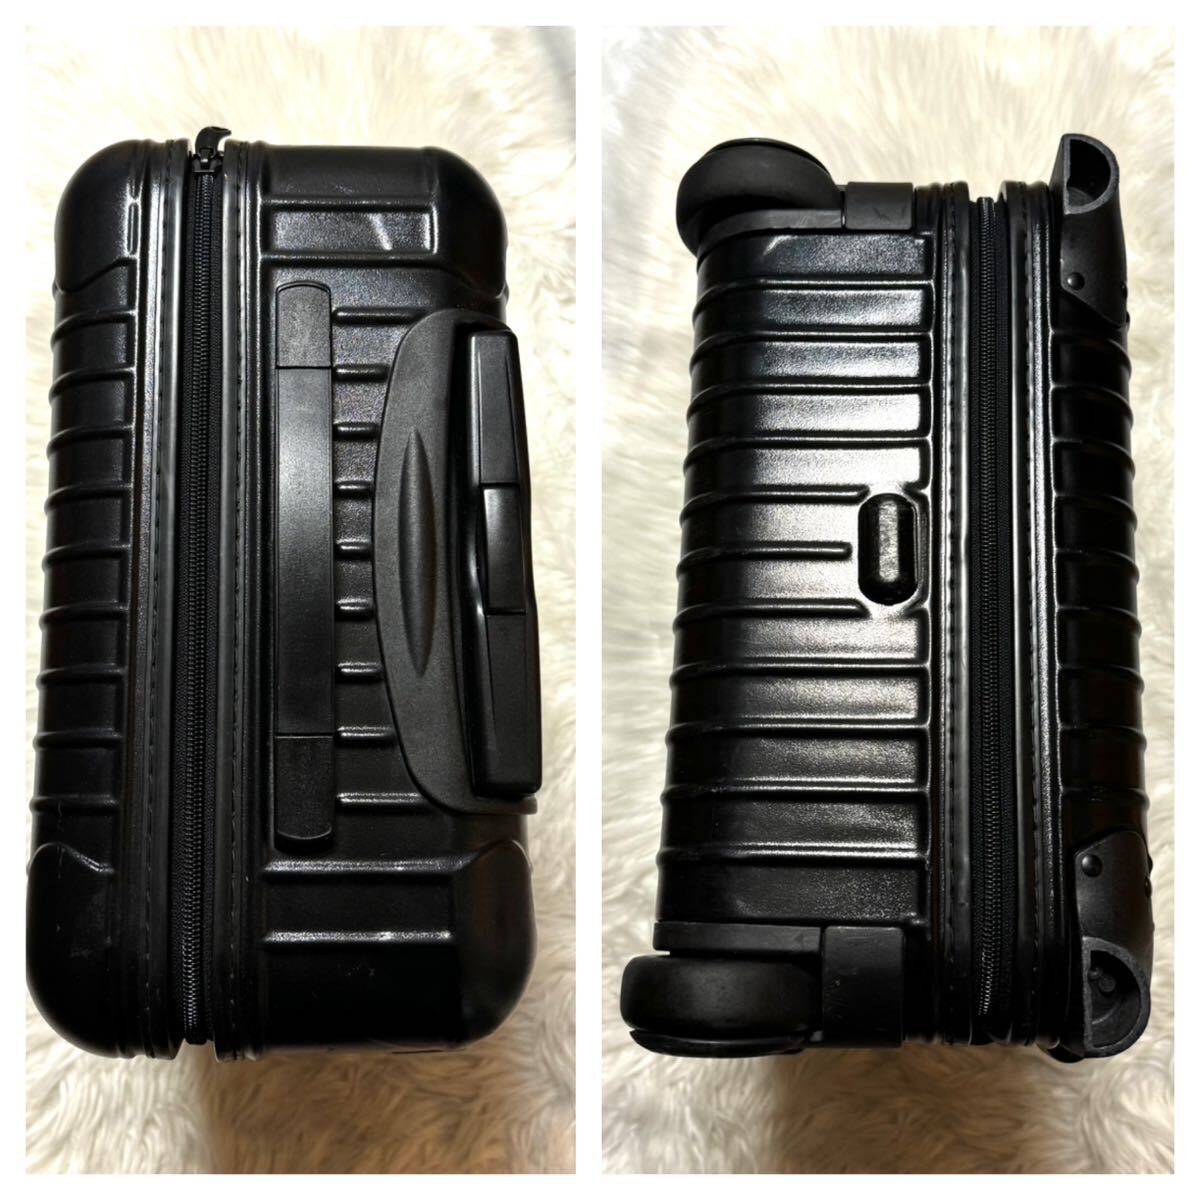  genuine article Rimowa salsa leather switch two wheel suit Carry case black machine inside bringing in size RIMOWA SALSA